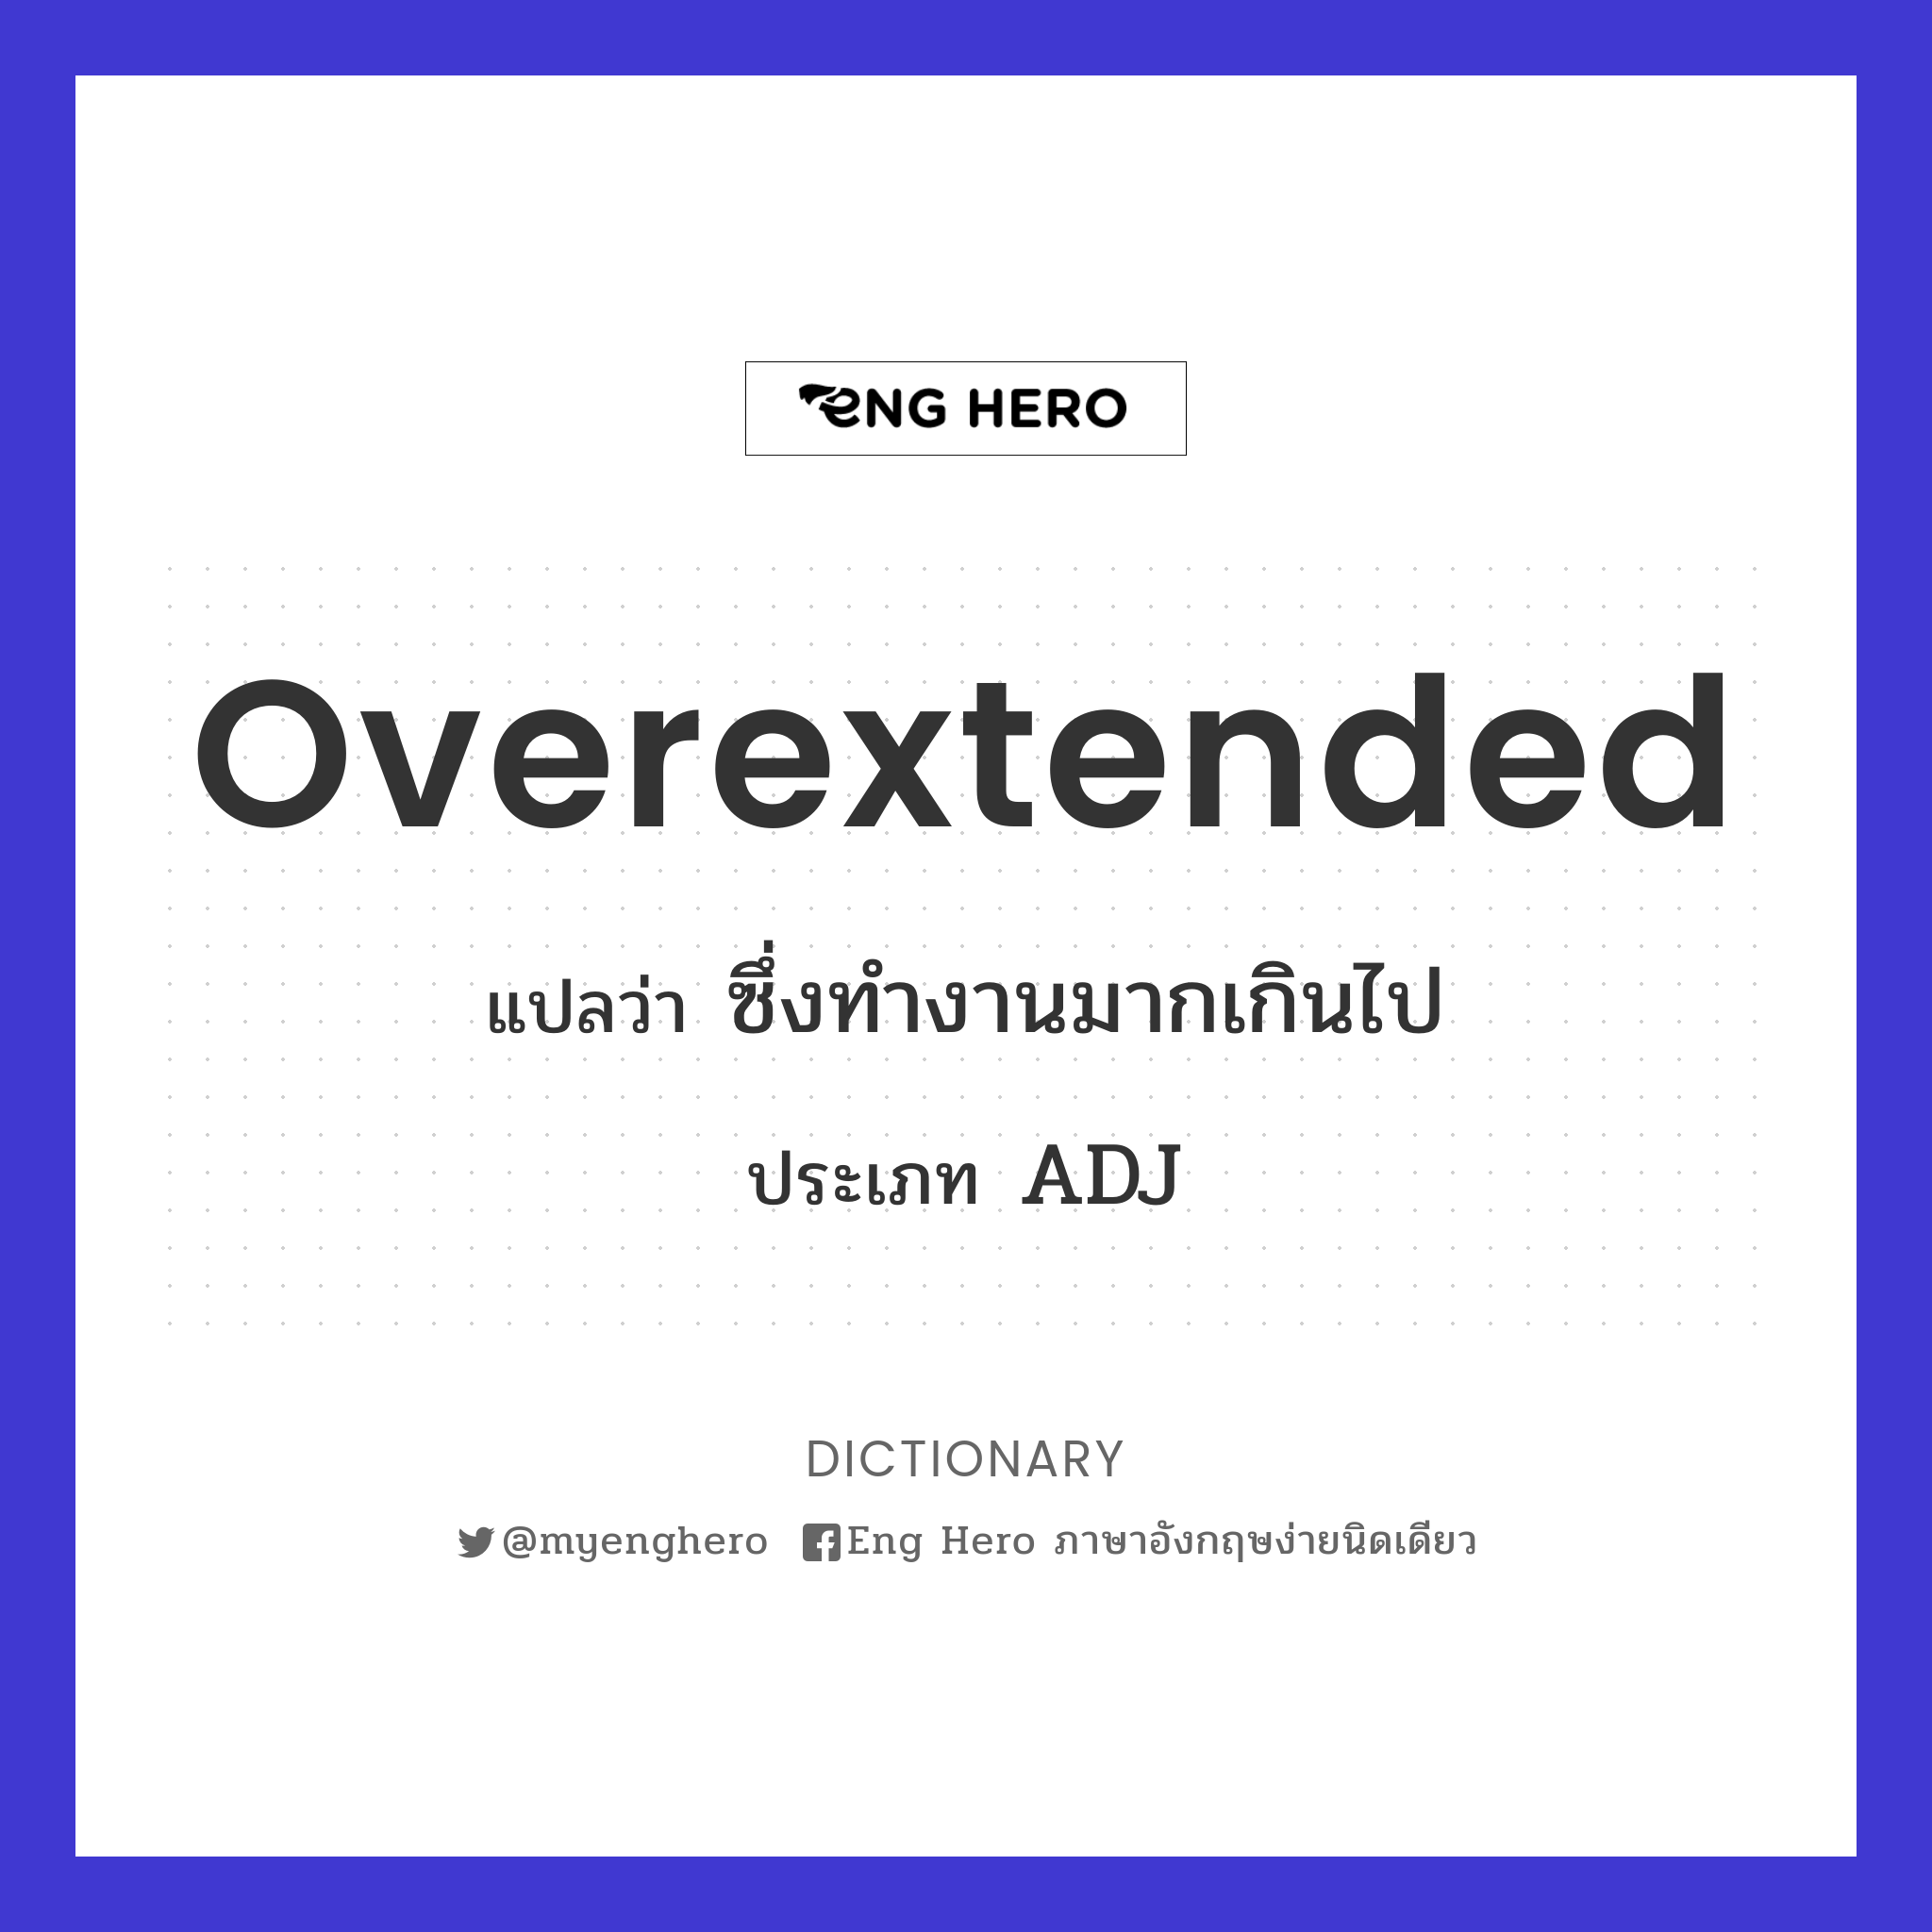 overextended